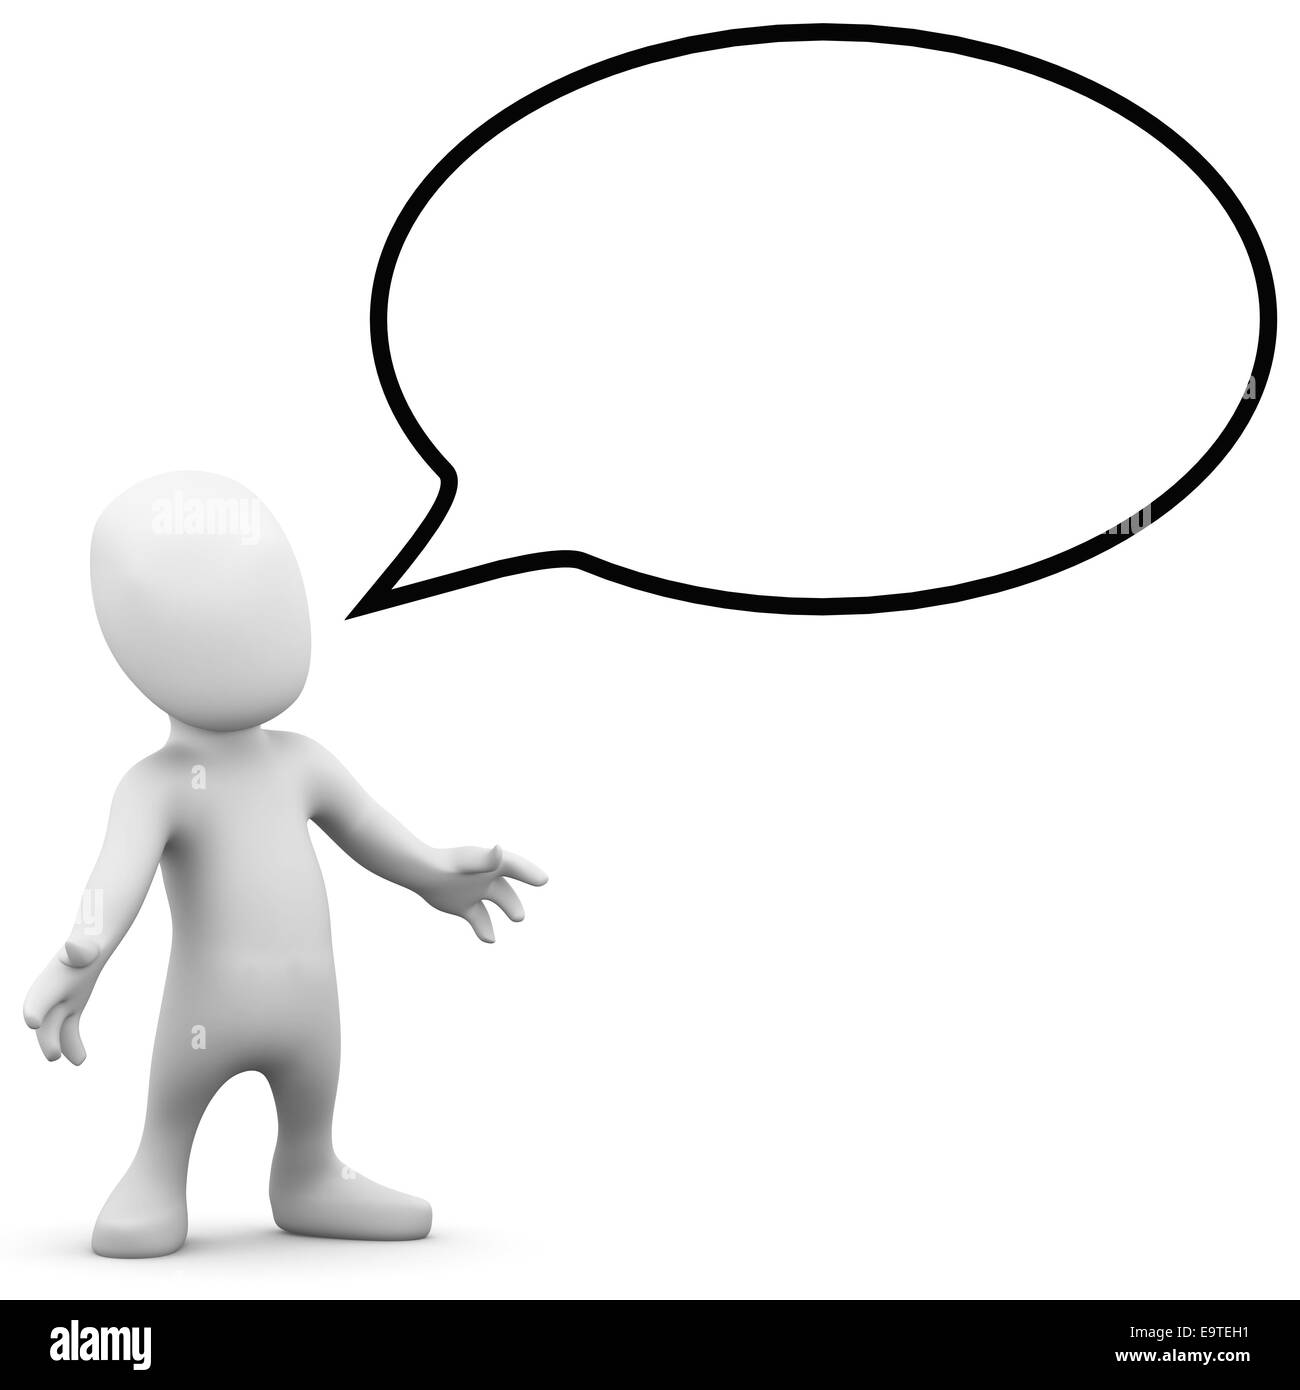 Man speech bubble Black and White Stock Photos & Images - Alamy